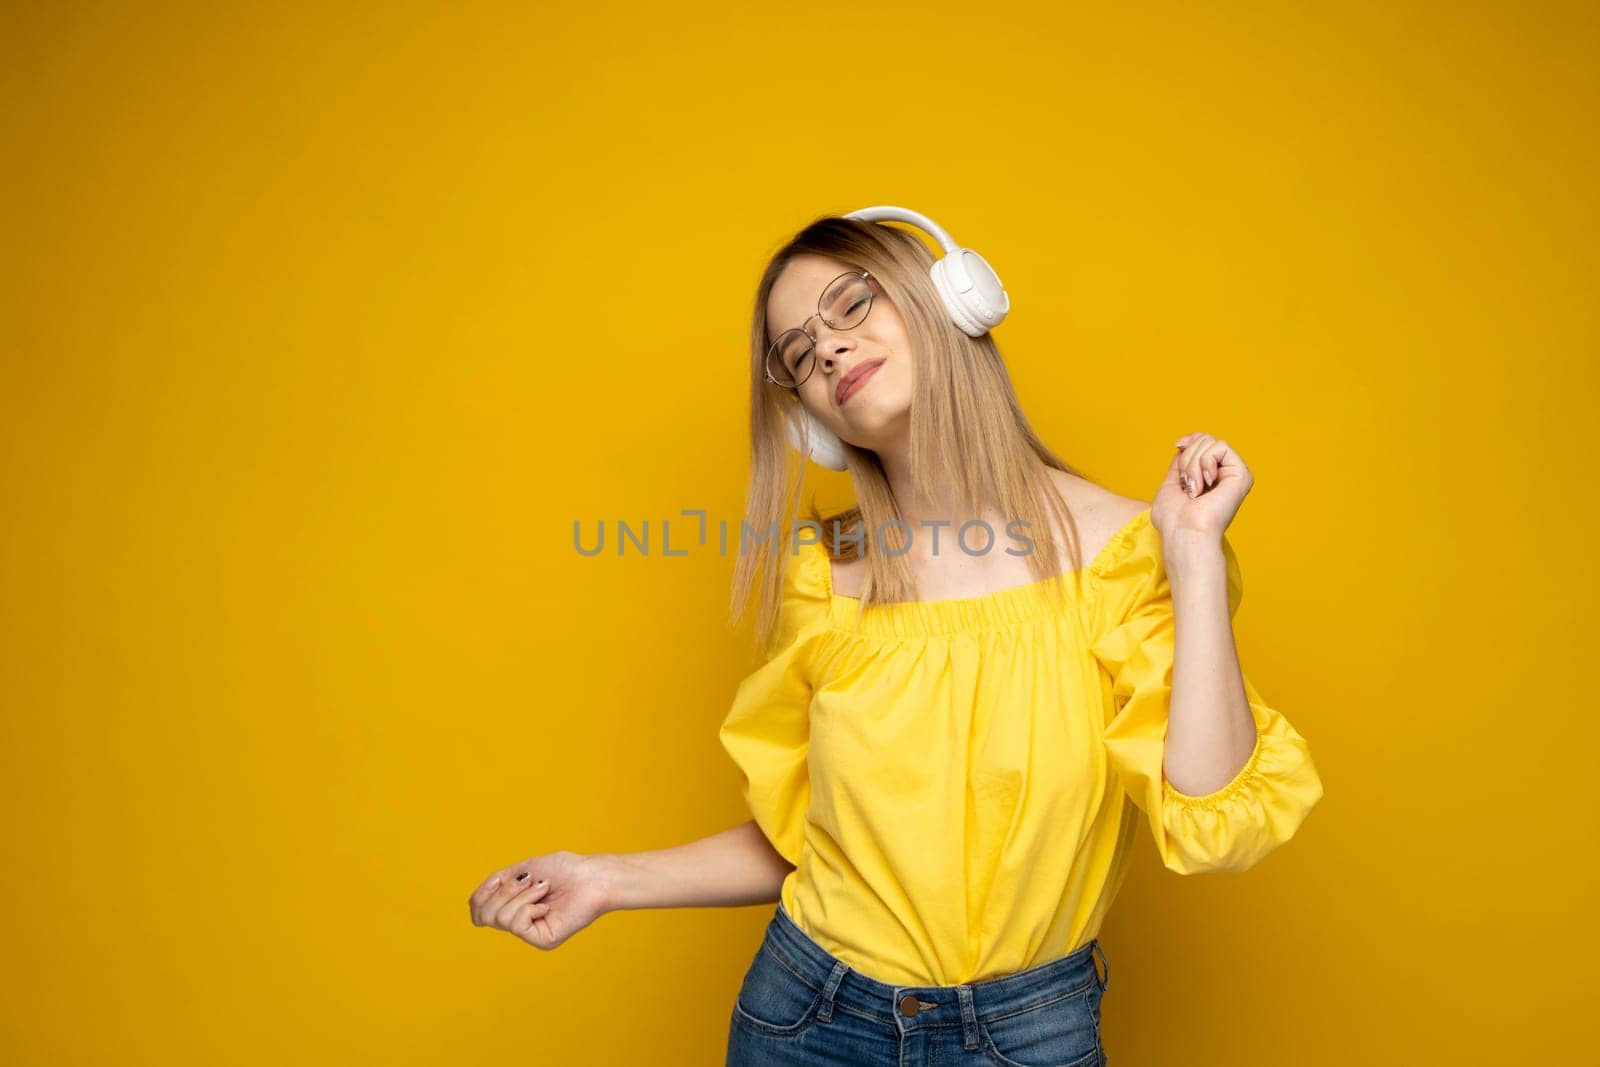 Happy girl in a glasses and yellow shirt dancing and listening to the music isolated on a yellow background